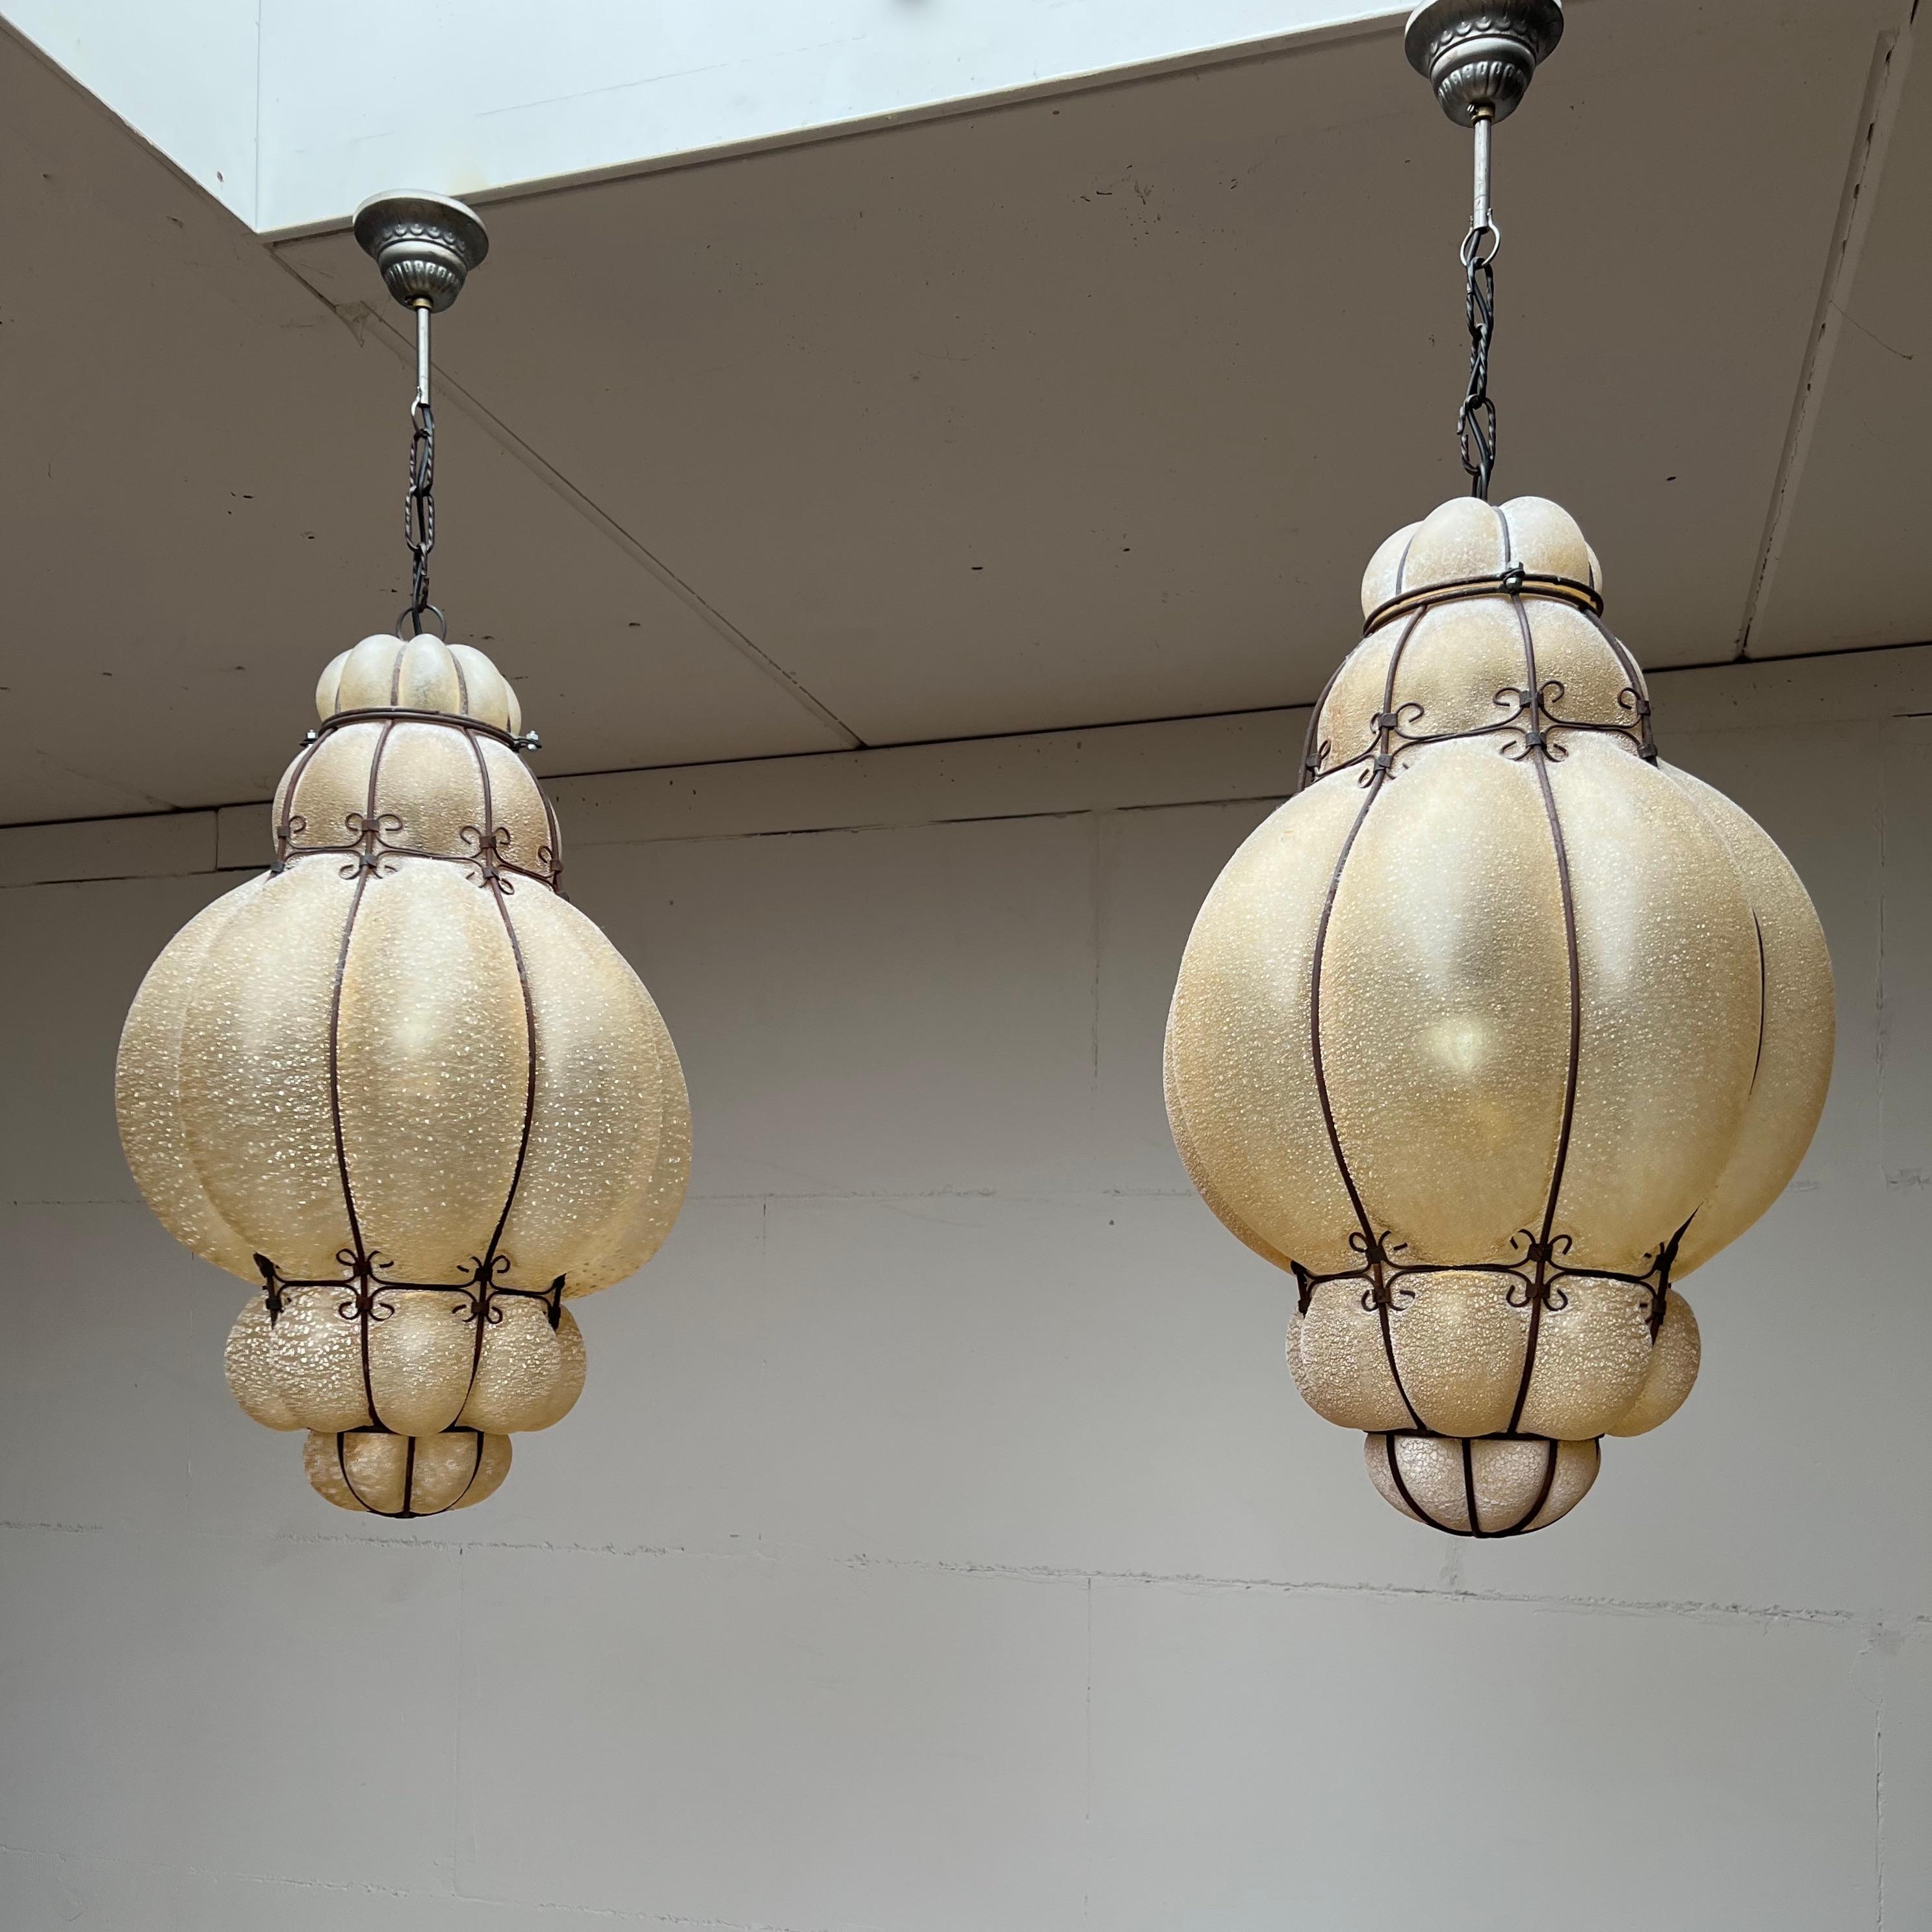 These large size & marvelous shape mouth blown pendants / chandeliers are in near-mint condition.

To give you a better idea of the unique size of this striking, frosted glass Murano pendant we have added image 3 where one is placed next to a very